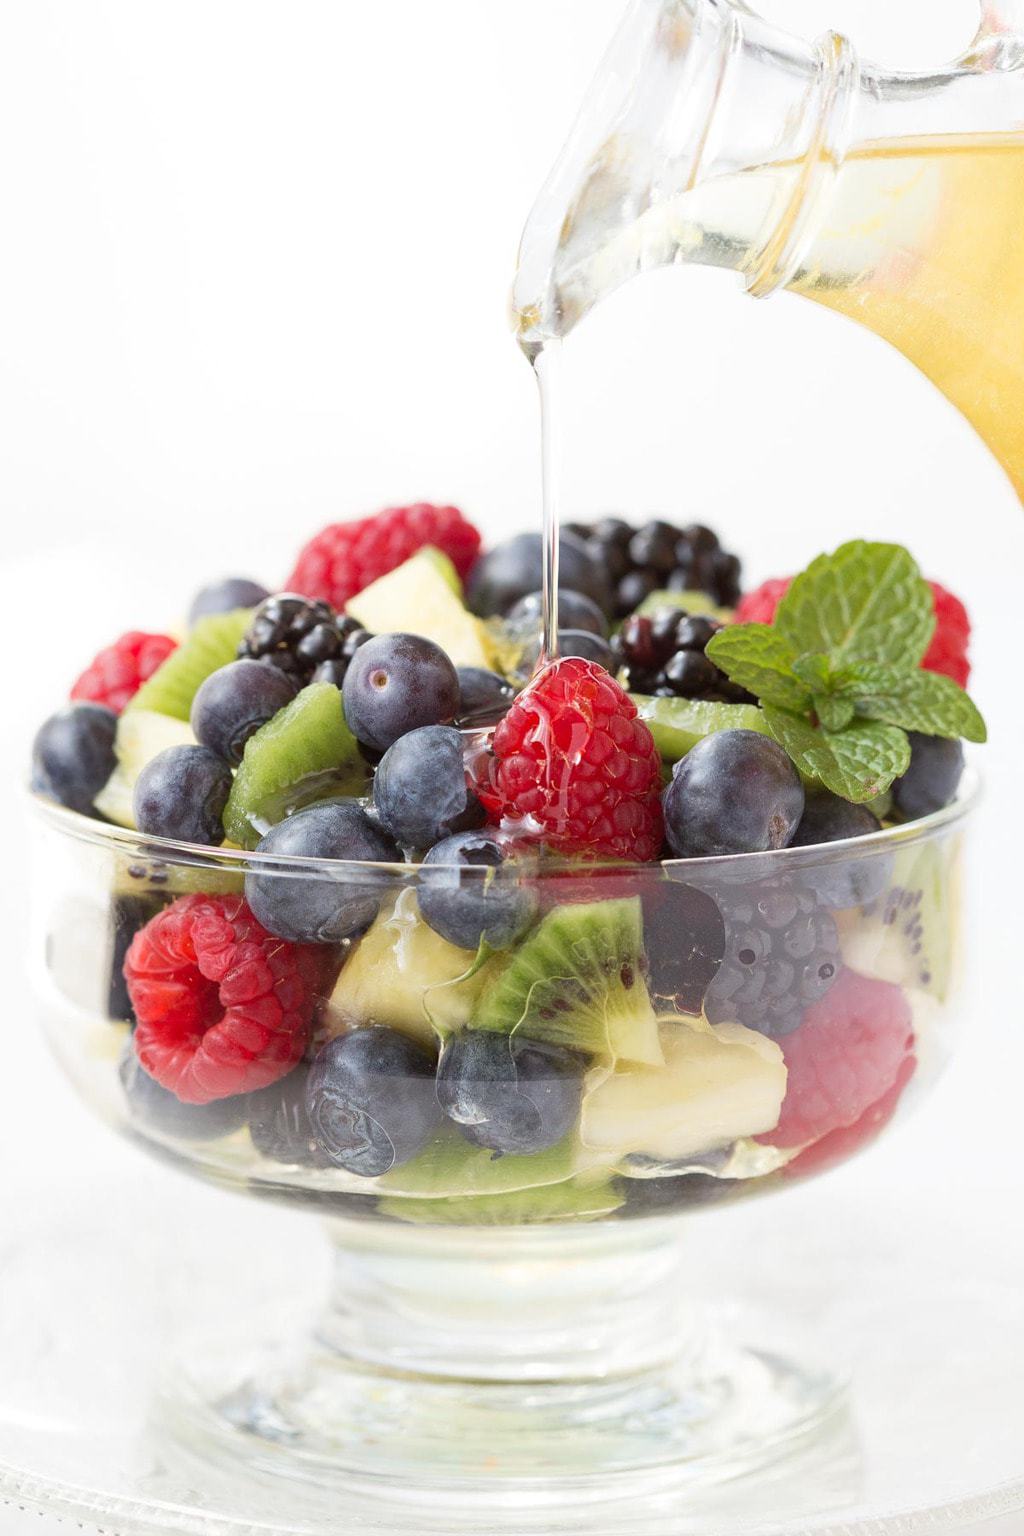 Vertical photo of a bottle of Limoncello Syrup being poured on fresh fruit in a glass serving bowl.